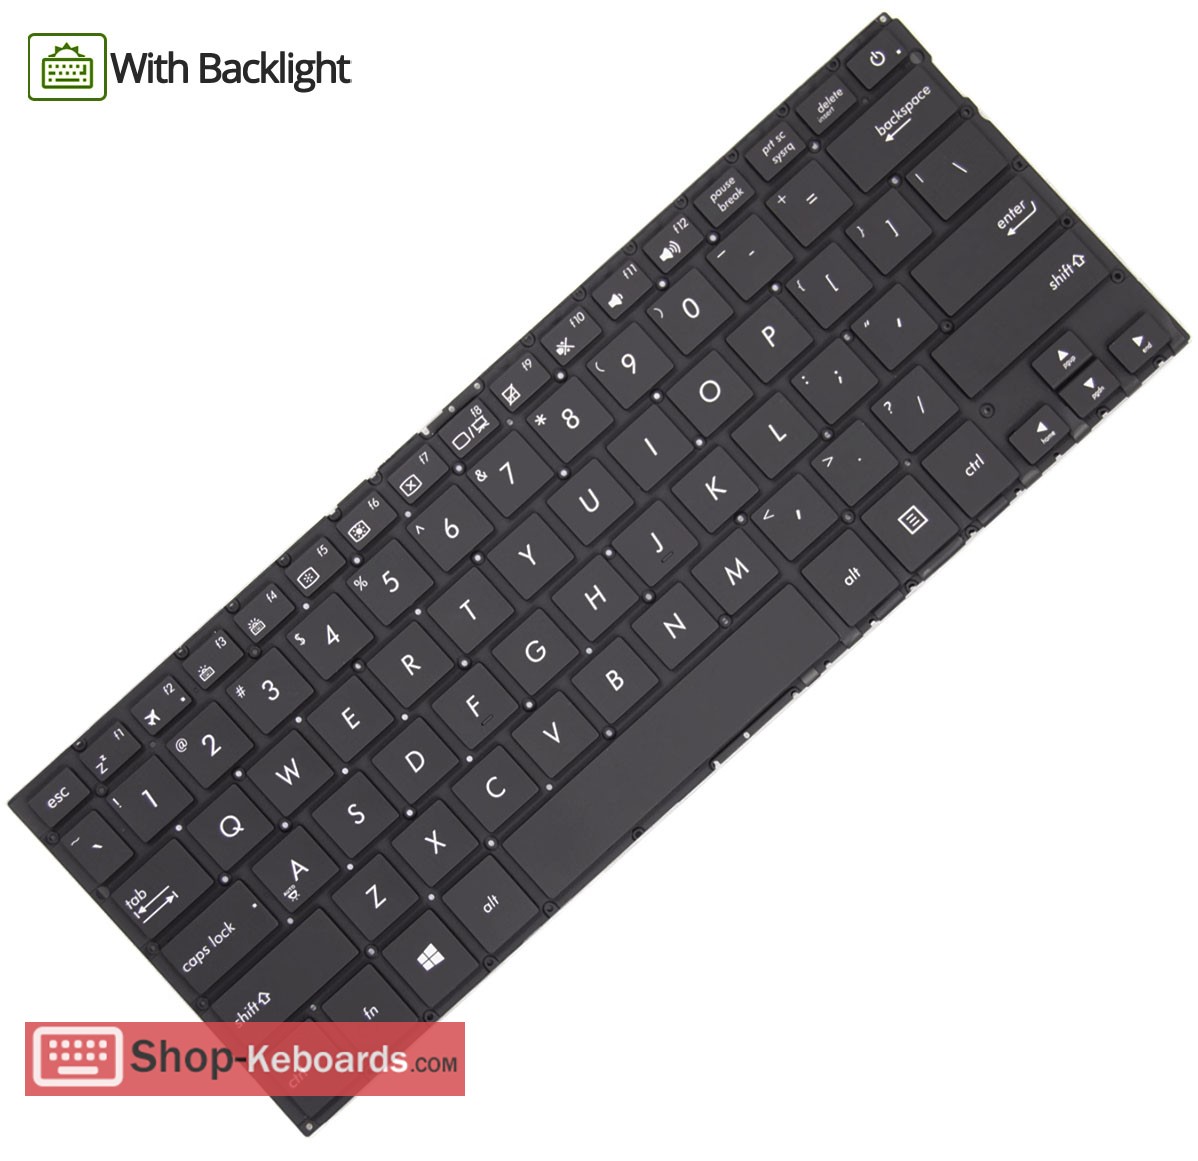 Asus 0KNB0-2627BE00 Keyboard replacement